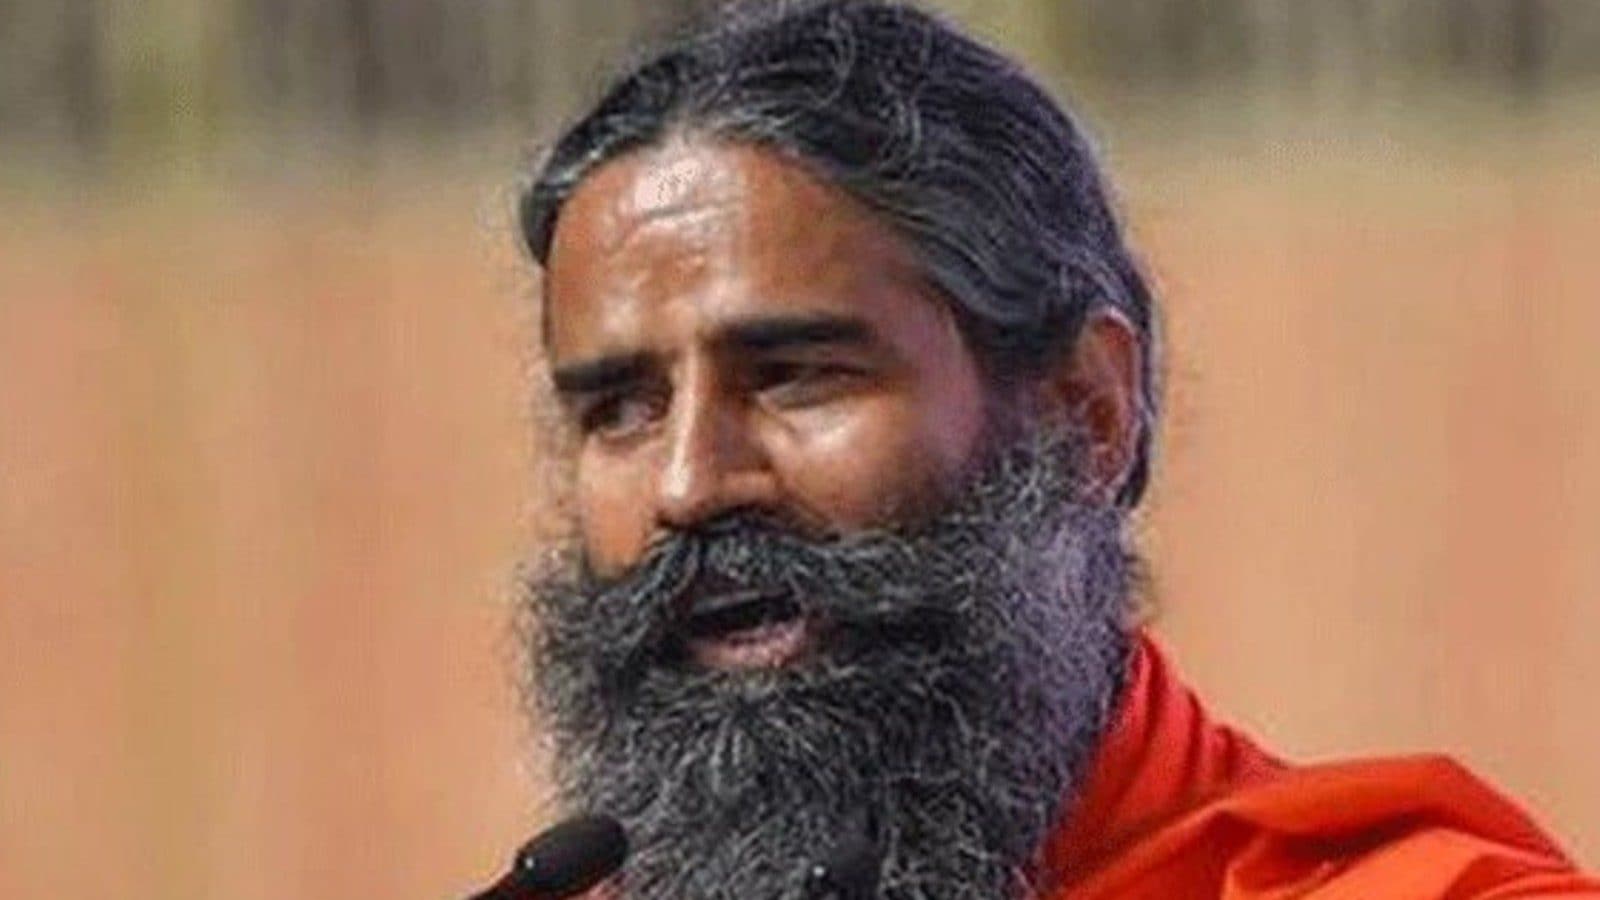 Cancer Cases Went Up After Covid-19 Pandemic, Says Ramdev; Experts Say There is No Connection